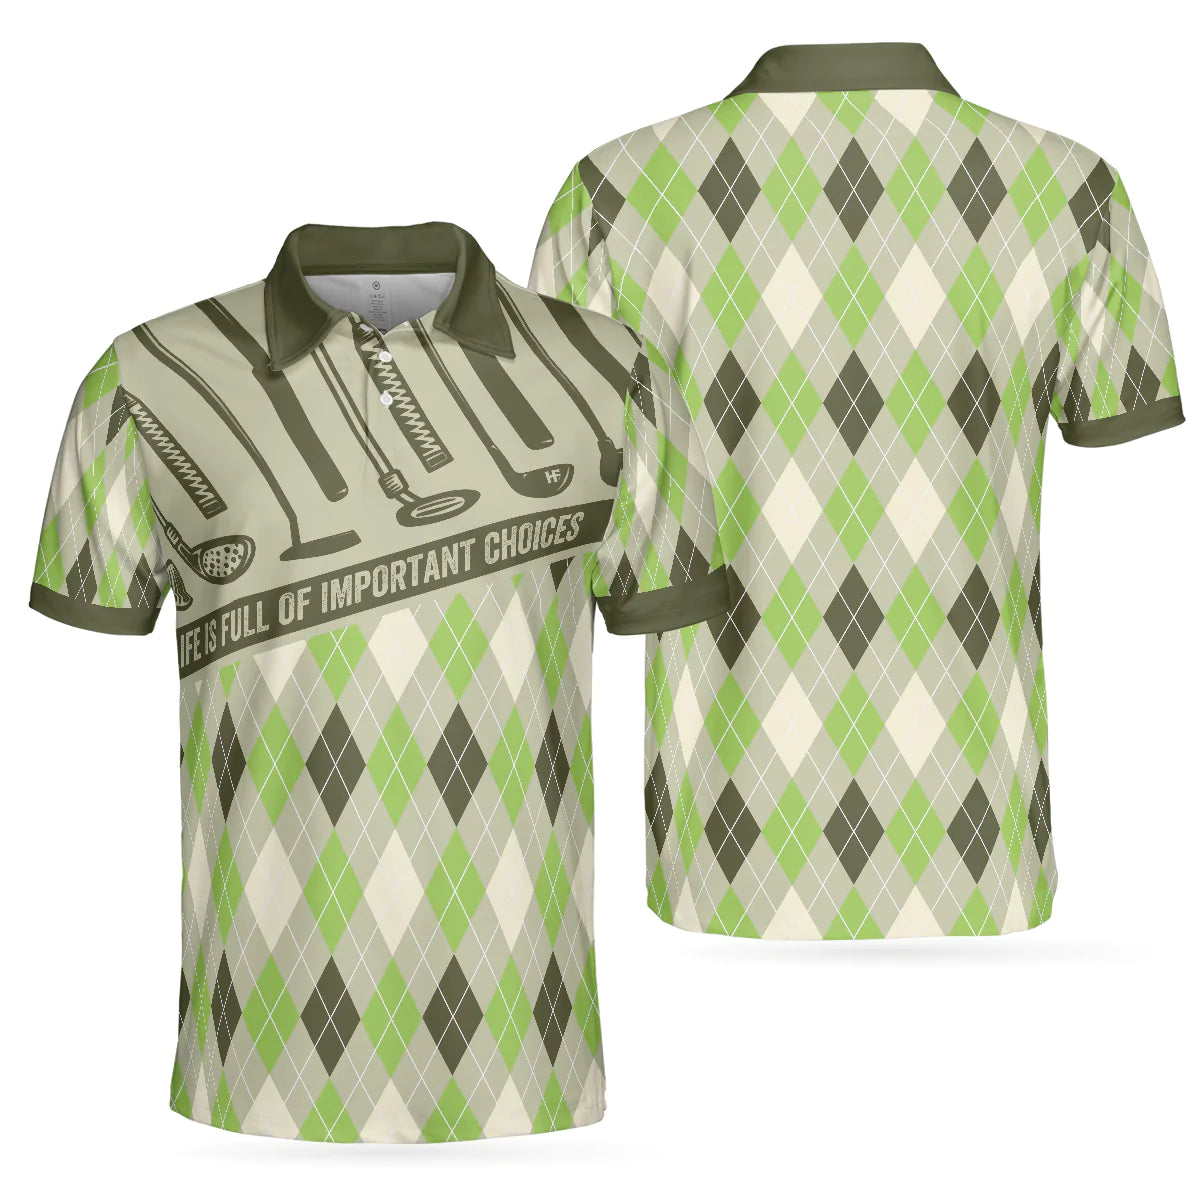 Men’s Polo Shirt with Green Argyle Pattern and Life Is Full Of Important Choices Design – GP362